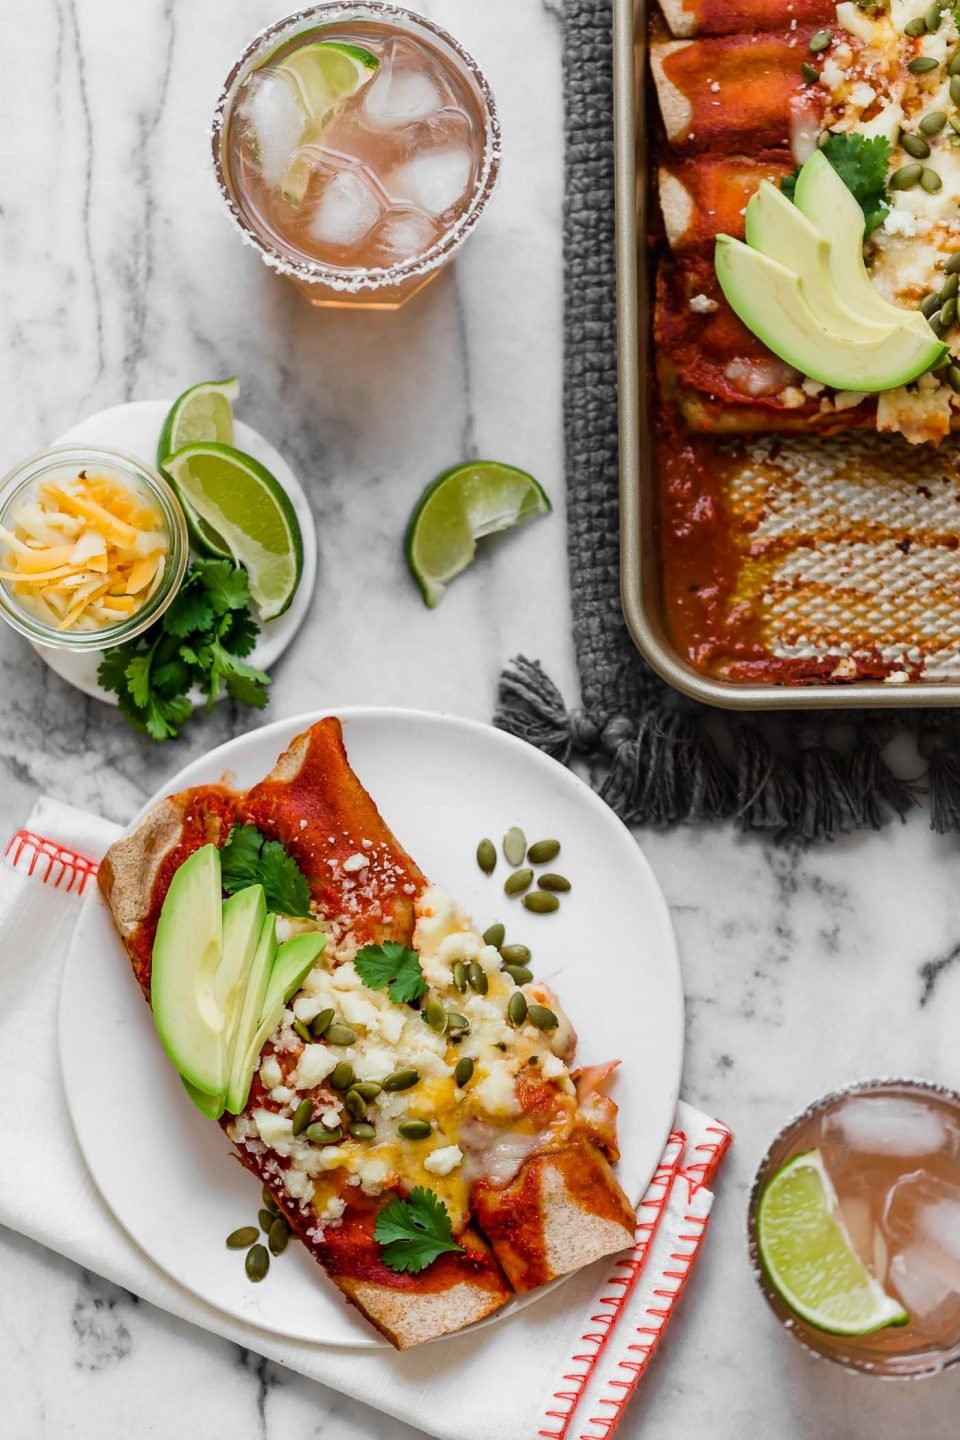 an easy & healthy chicken enchilada recipe perfect for weeknight cooking! these weeknight chicken enchiladas have a filling of pulled chicken, bell pepper sweet onion, black beans, & cheese, and get covered in the easiest blender enchilada sauce made from ancho chiles. the only thing missing is a couple of margaritas! #playswellwithbutter #chickenenchiladas #easychickenenchiladas #enchiladasrecipe #healthyenchiladas #mexicanfoodrecipes #homemadenchiladasauce #enchiladasaucerecipe #easydinnerrecipe #healthydinnerrecipe #mealpreprecipe